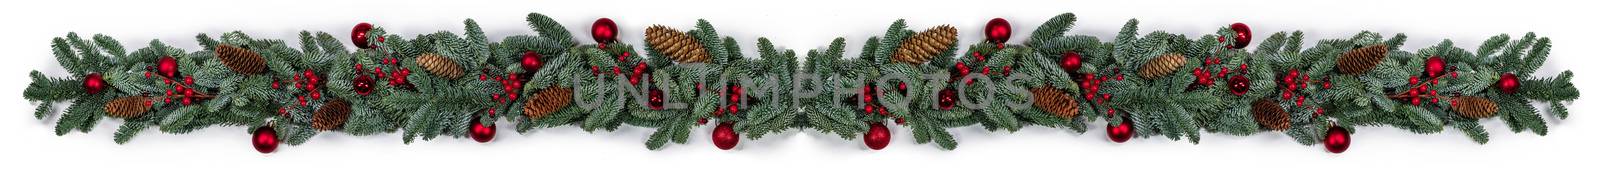 Christmas border frame design copmosition of noble fir tree branch and red decorations balls baubles berries cones isolated on white background